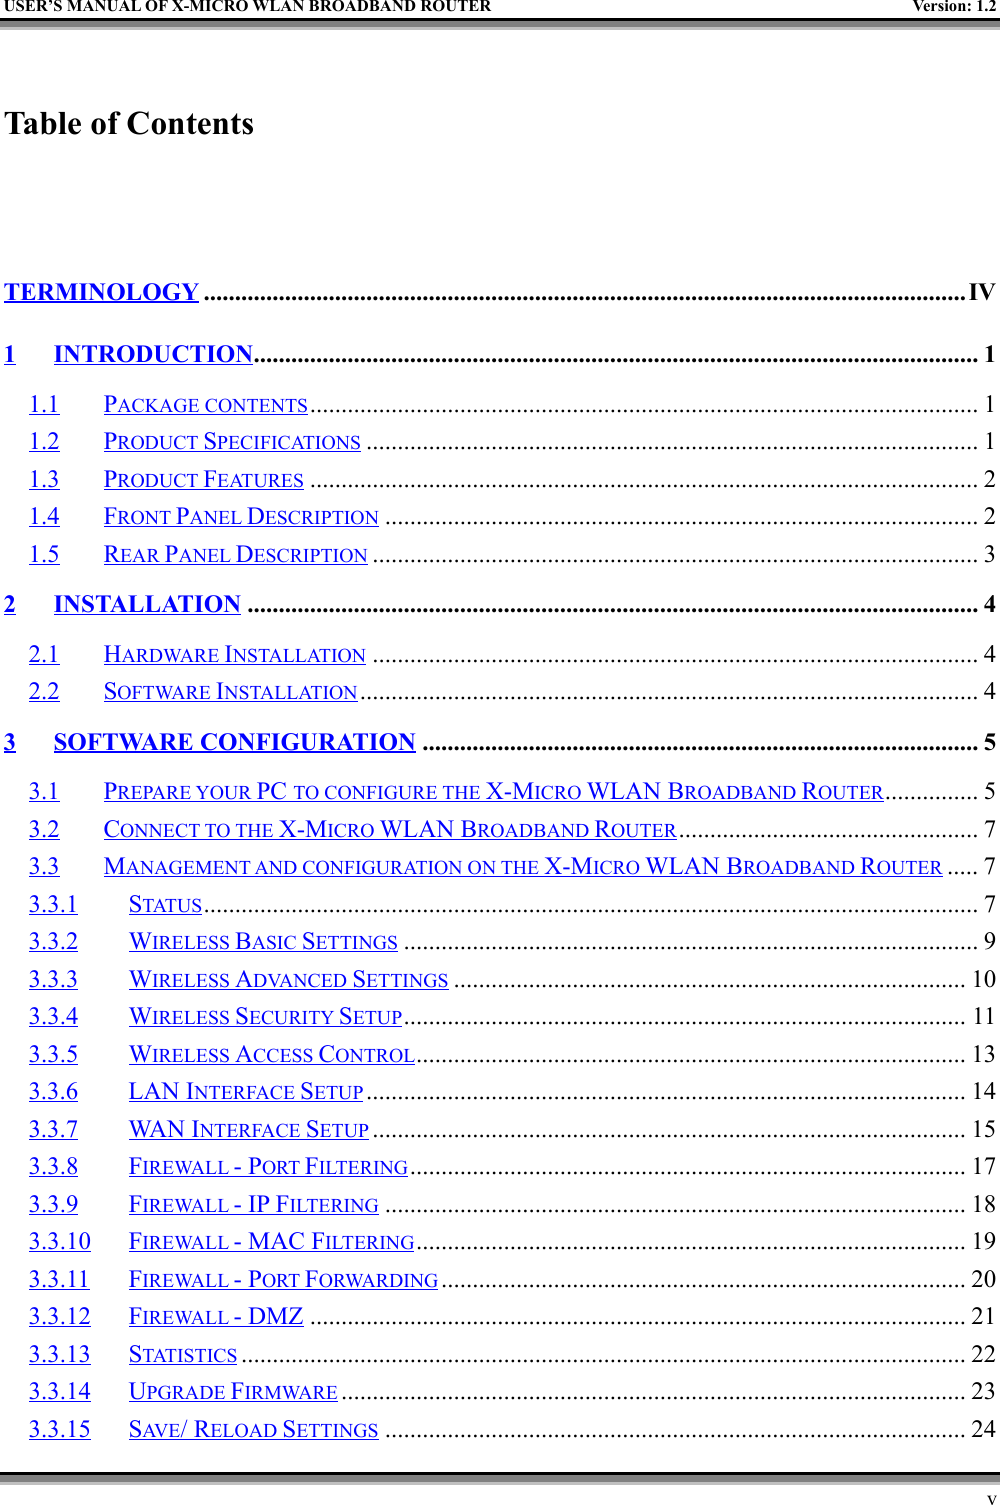 USER’S MANUAL OF X-MICRO WLAN BROADBAND ROUTER Version: 1.2vTable of Contents  TERMINOLOGY ..........................................................................................................................IV1 INTRODUCTION.................................................................................................................... 11.1 PACKAGE CONTENTS........................................................................................................... 11.2 PRODUCT SPECIFICATIONS .................................................................................................. 11.3 PRODUCT FEATURES ........................................................................................................... 21.4 FRONT PANEL DESCRIPTION ............................................................................................... 21.5 REAR PANEL DESCRIPTION ................................................................................................. 32INSTALLATION..................................................................................................................... 42.1 HARDWARE INSTALLATION ................................................................................................. 42.2 SOFTWARE INSTALLATION ................................................................................................... 43 SOFTWARE CONFIGURATION ......................................................................................... 53.1 PREPARE YOUR PC TO CONFIGURE THE X-MICRO WLAN BROADBAND ROUTER............... 53.2 CONNECT TO THE X-MICRO WLAN BROADBAND ROUTER................................................ 73.3 MANAGEMENT AND CONFIGURATION ON THE X-MICRO WLAN BROADBAND ROUTER ..... 73.3.1 STATUS ............................................................................................................................ 73.3.2 WIRELESS BASIC SETTINGS ............................................................................................ 93.3.3 WIRELESS ADVANCED SETTINGS .................................................................................. 103.3.4 WIRELESS SECURITY SETUP.......................................................................................... 113.3.5 WIRELESS ACCESS CONTROL........................................................................................ 133.3.6 LAN INTERFACE SETUP ................................................................................................ 143.3.7 WAN INTERFACE SETUP ............................................................................................... 153.3.8 FIREWALL - PORT FILTERING......................................................................................... 173.3.9 FIREWALL - IP FILTERING ............................................................................................. 183.3.10 FIREWALL - MAC FILTERING........................................................................................ 193.3.11 FIREWALL - PORT FORWARDING .................................................................................... 203.3.12 FIREWALL - DMZ ......................................................................................................... 213.3.13 STATISTICS .................................................................................................................... 223.3.14 UPGRADE FIRMWARE .................................................................................................... 233.3.15 SAV E / RELOAD SETTINGS ............................................................................................. 24